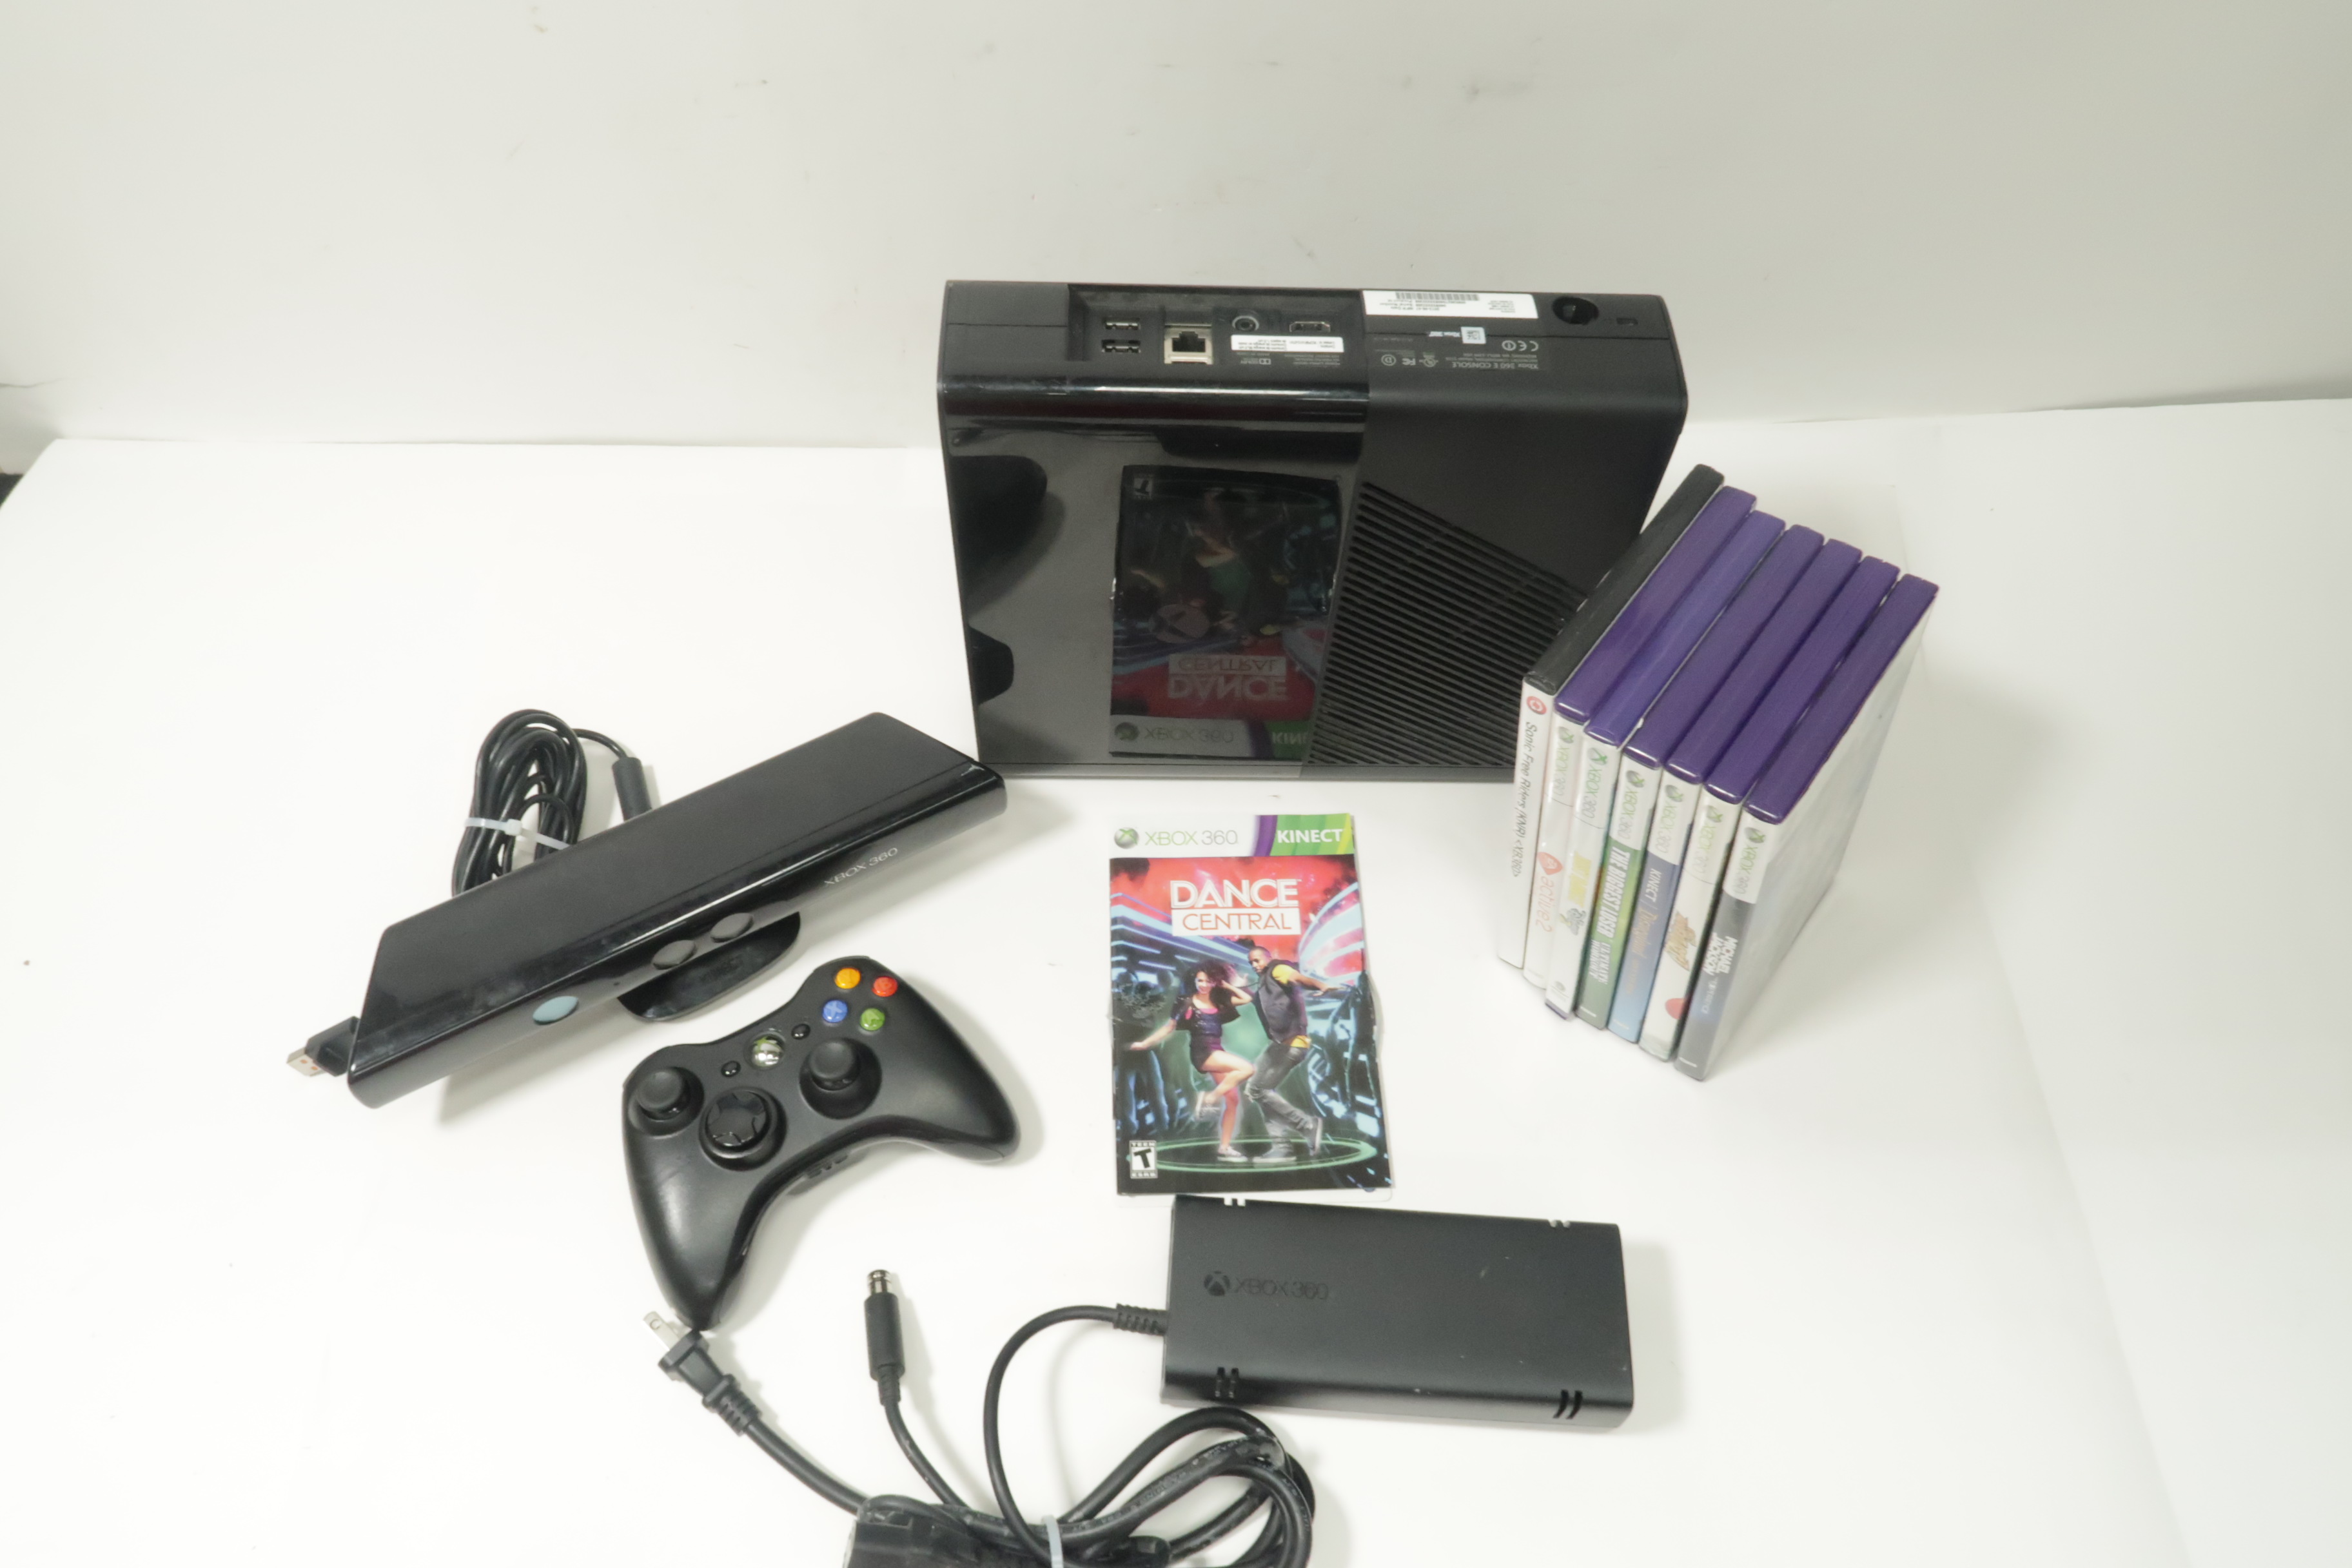 Authentic Xbox 360 Console S + Pick Kinect 4GB 250GB 500GB & More + US  Seller